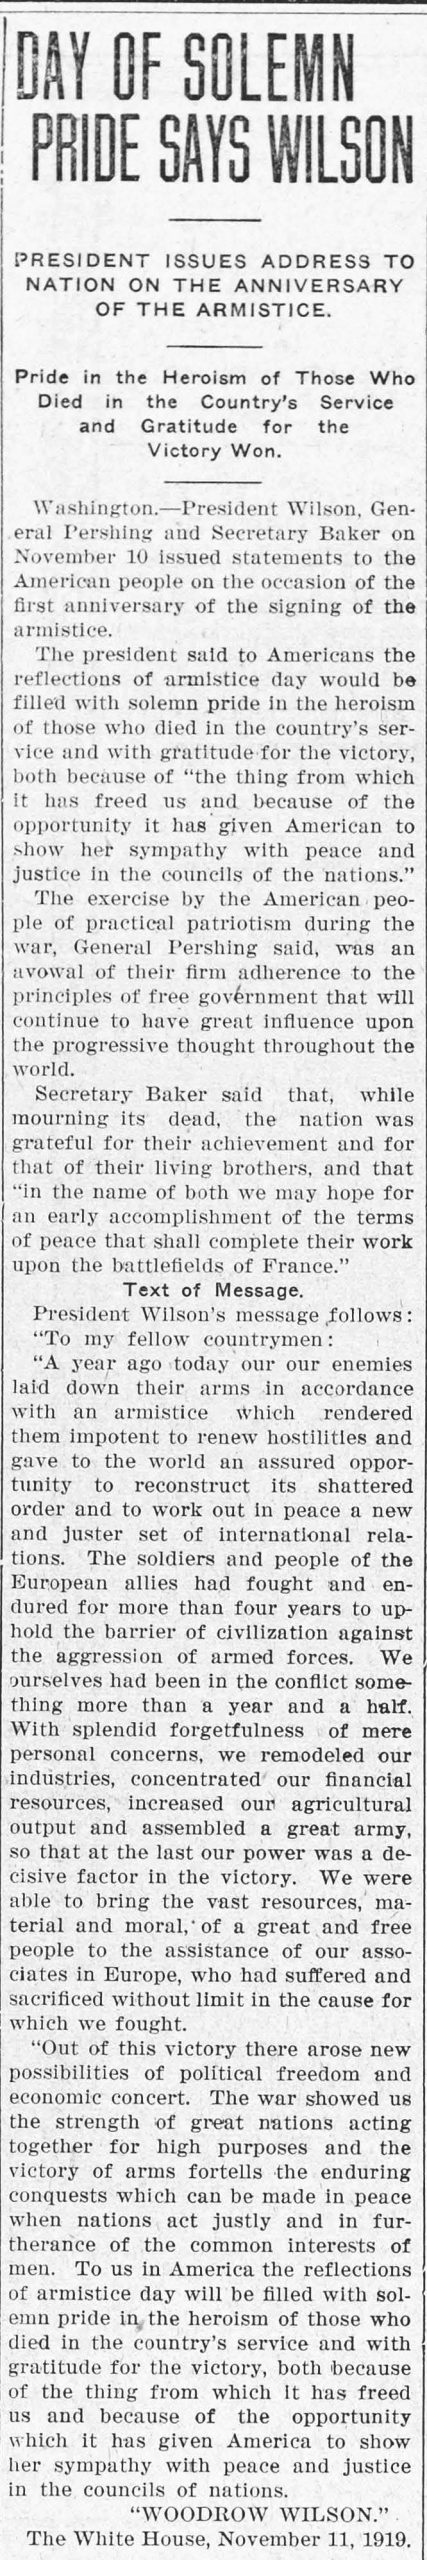 Newspaper article, not fully Transcribed, Title - Day of Solemn Pride Says Wilson, Sub Headings - President Issues Address to Nation on Anniversary of the Armistice Pride in the Heroism of those who died in the Country's Service and Gratitude for the Victory Won. Final Paragraph in text of blog.